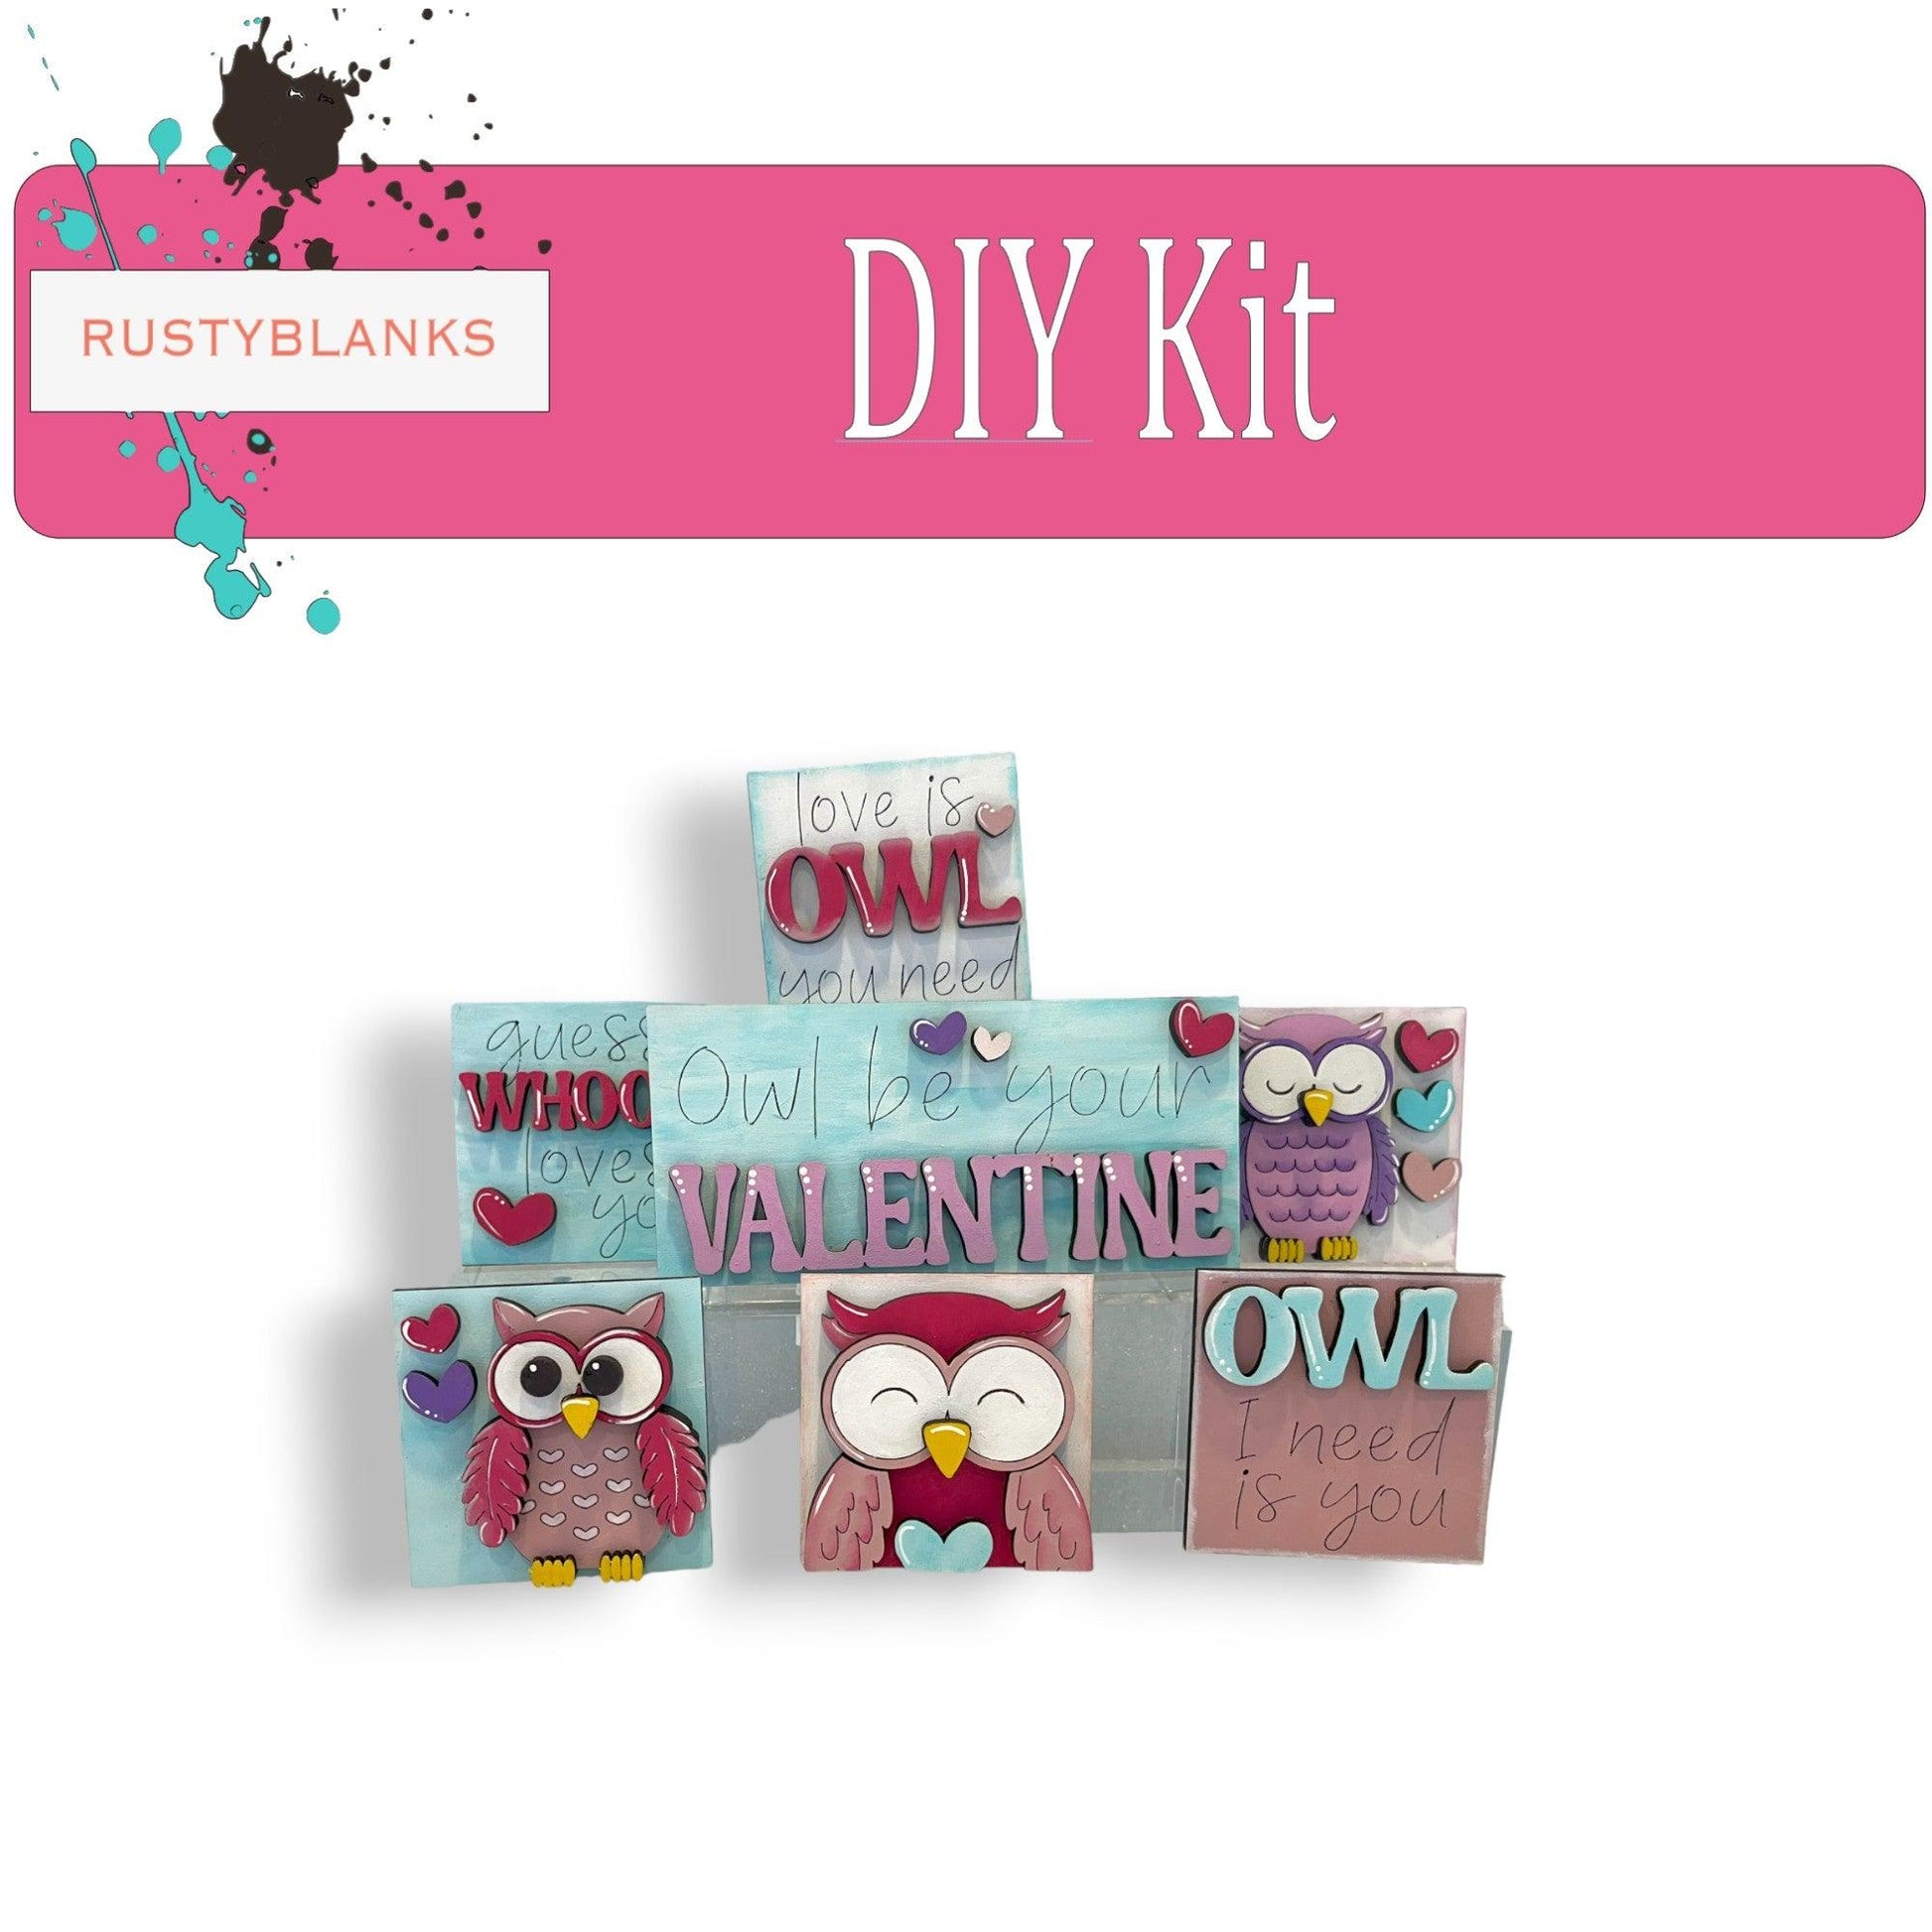 Valetine's Interchangeable Owl Love you Mini Tiles for leaning ladders or Shelf Sitters - RusticFarmhouseDecor